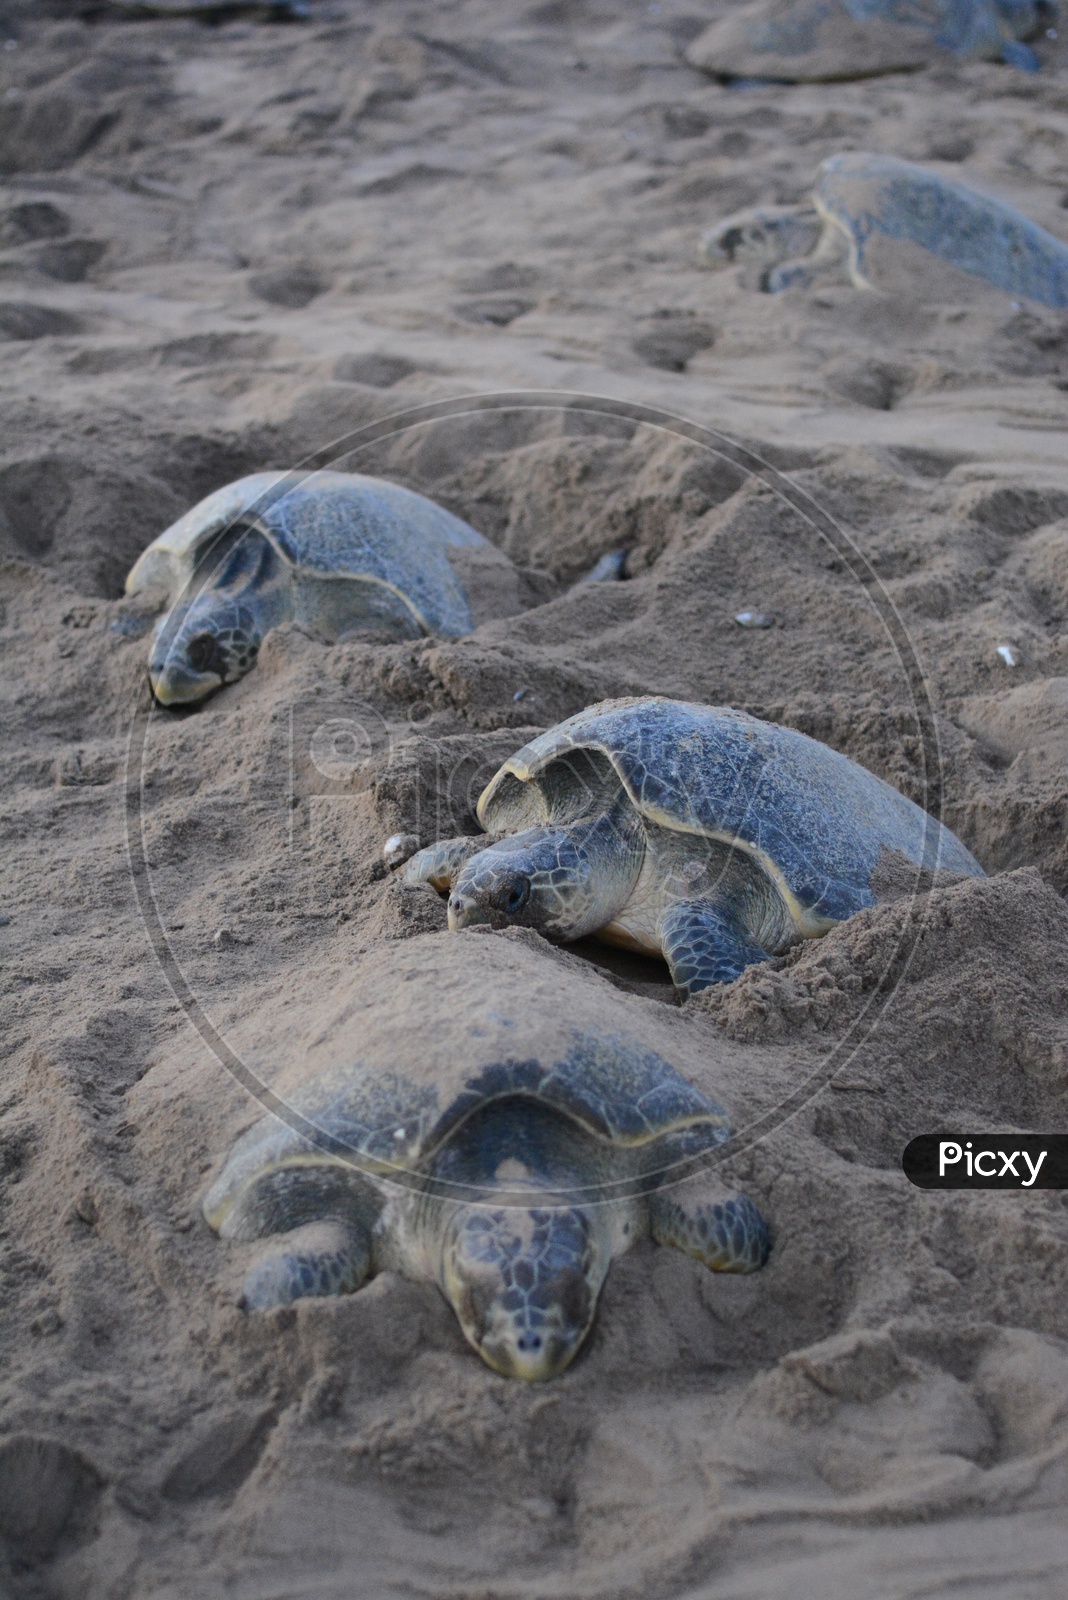 Olive Ridley Sea Turtles laying eggs